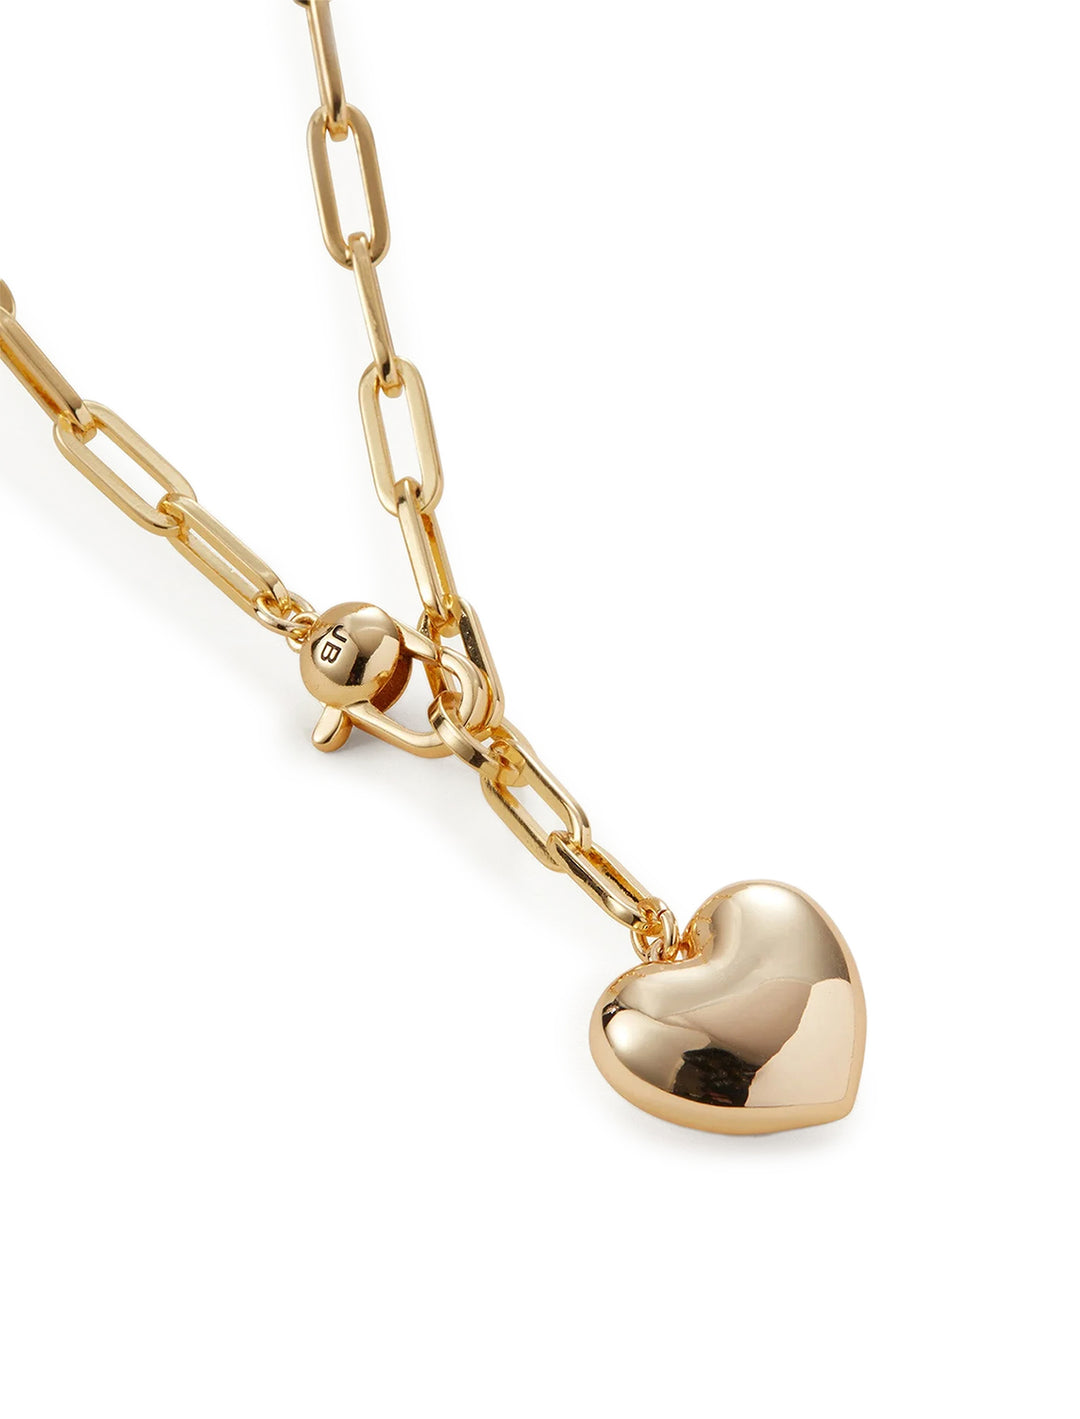 Close-up view of Jenny Bird's puffy heart chain necklace in gold.